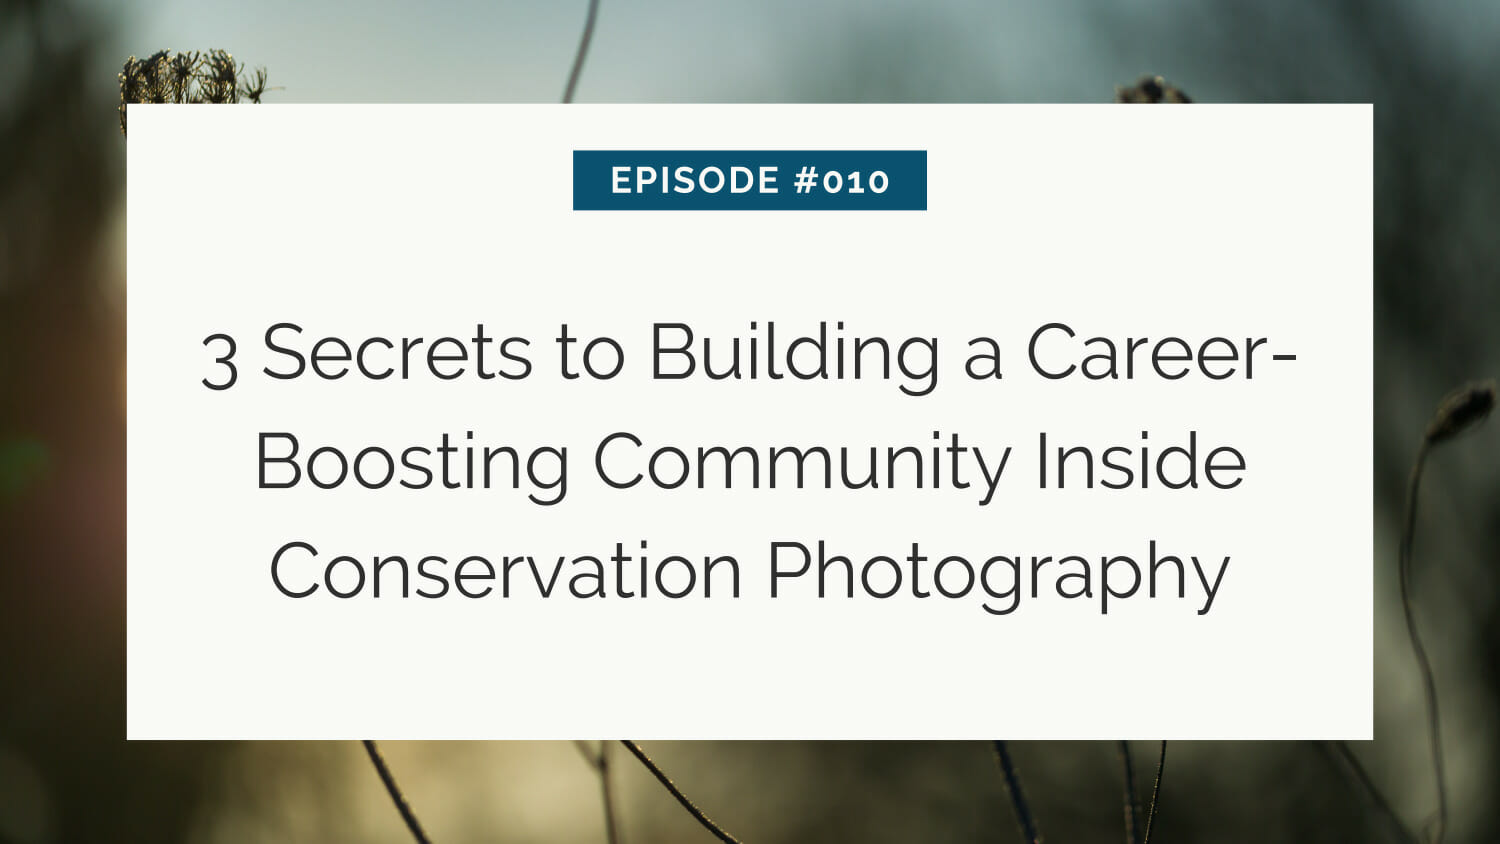 Episode #010 - tips on creating a supportive network for advancement in conservation photography.